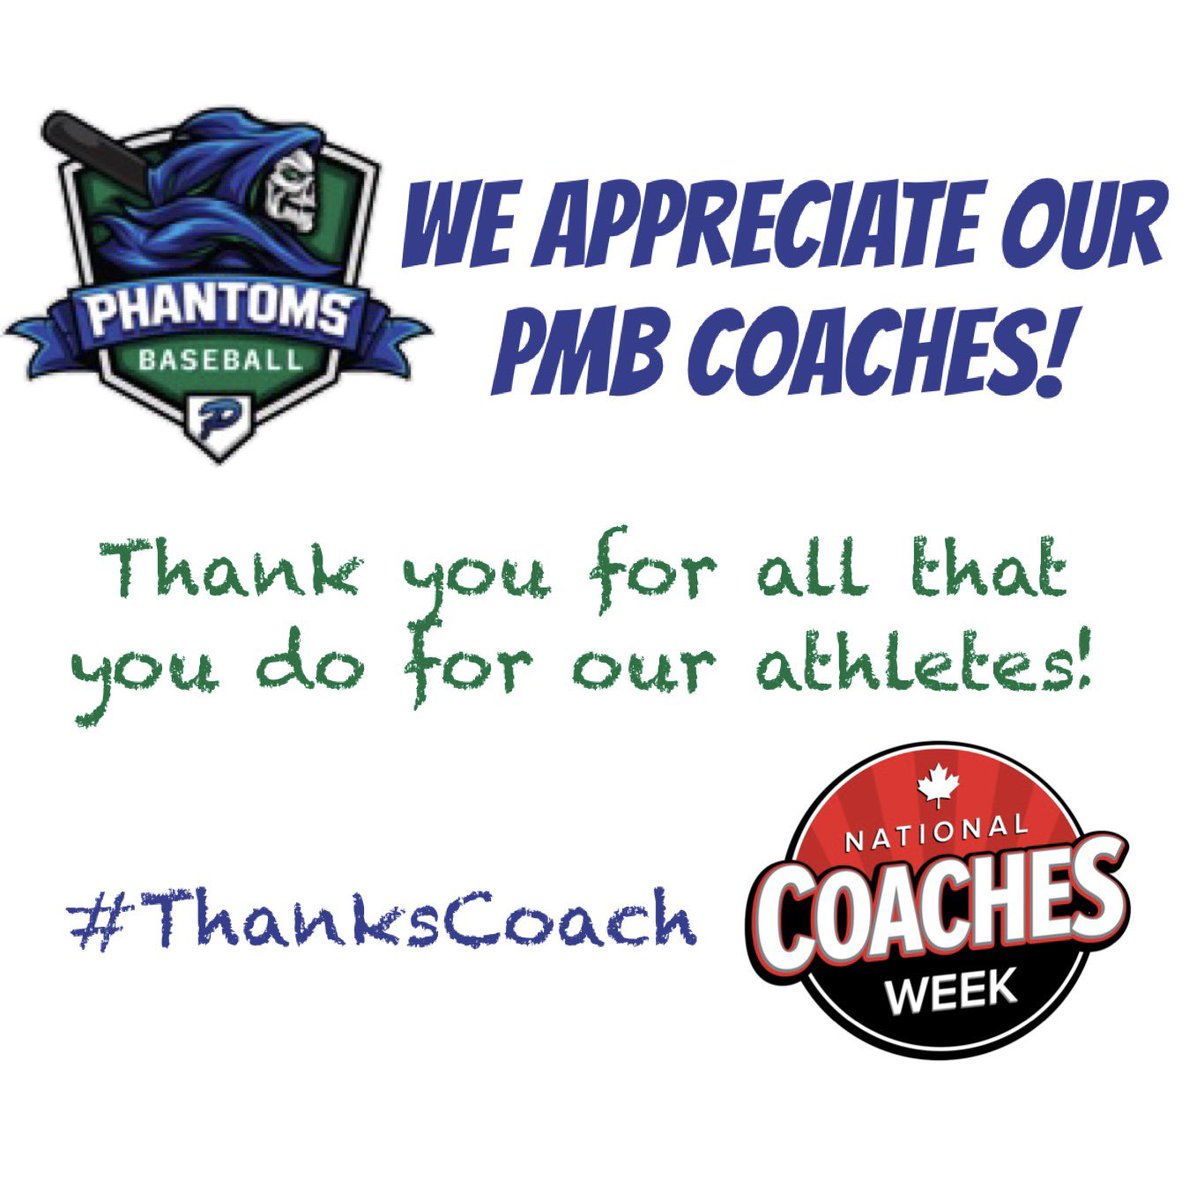 It’s the @CAC_ACE #NationalCoachesWeek! Take a moment to send a shout-out to one of our many phenomenal coaches by saying #ThanksCoach